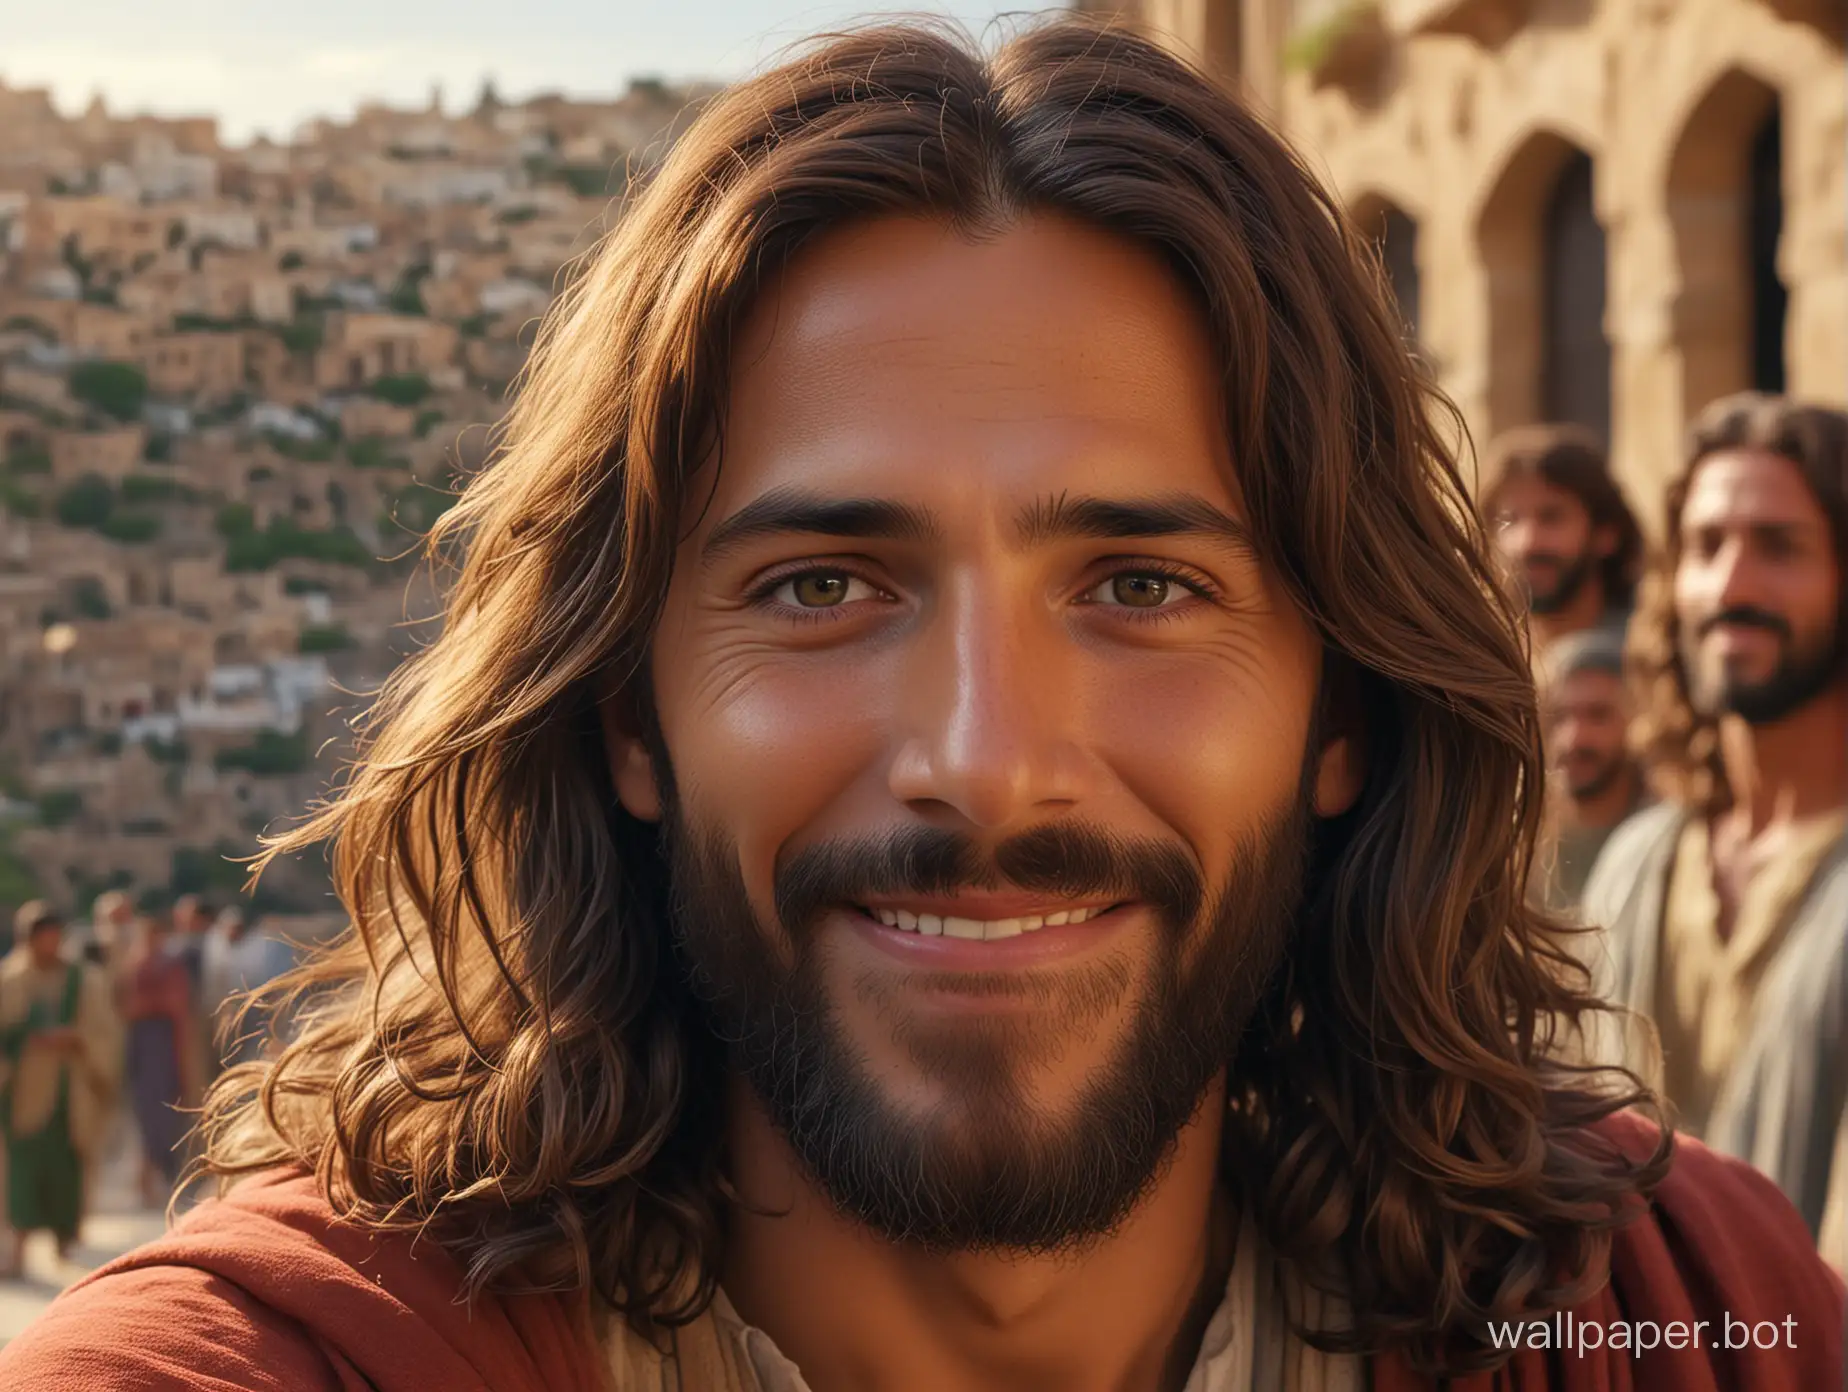 A stunning, realistic close-up image of Jesus smiling warmly, with his long, wavy hair and kind eyes. In the background, the twelve apostles are depicted in a detailed, period-accurate setting, perhaps a traditional Middle Eastern town or village. The scene is vibrant and full of life, with the colours and textures capturing the essence of the time period. The overall atmosphere of the image is cinematic and dramatic, inviting the viewer to delve deeper into the story., vibrant, photo, cinematic